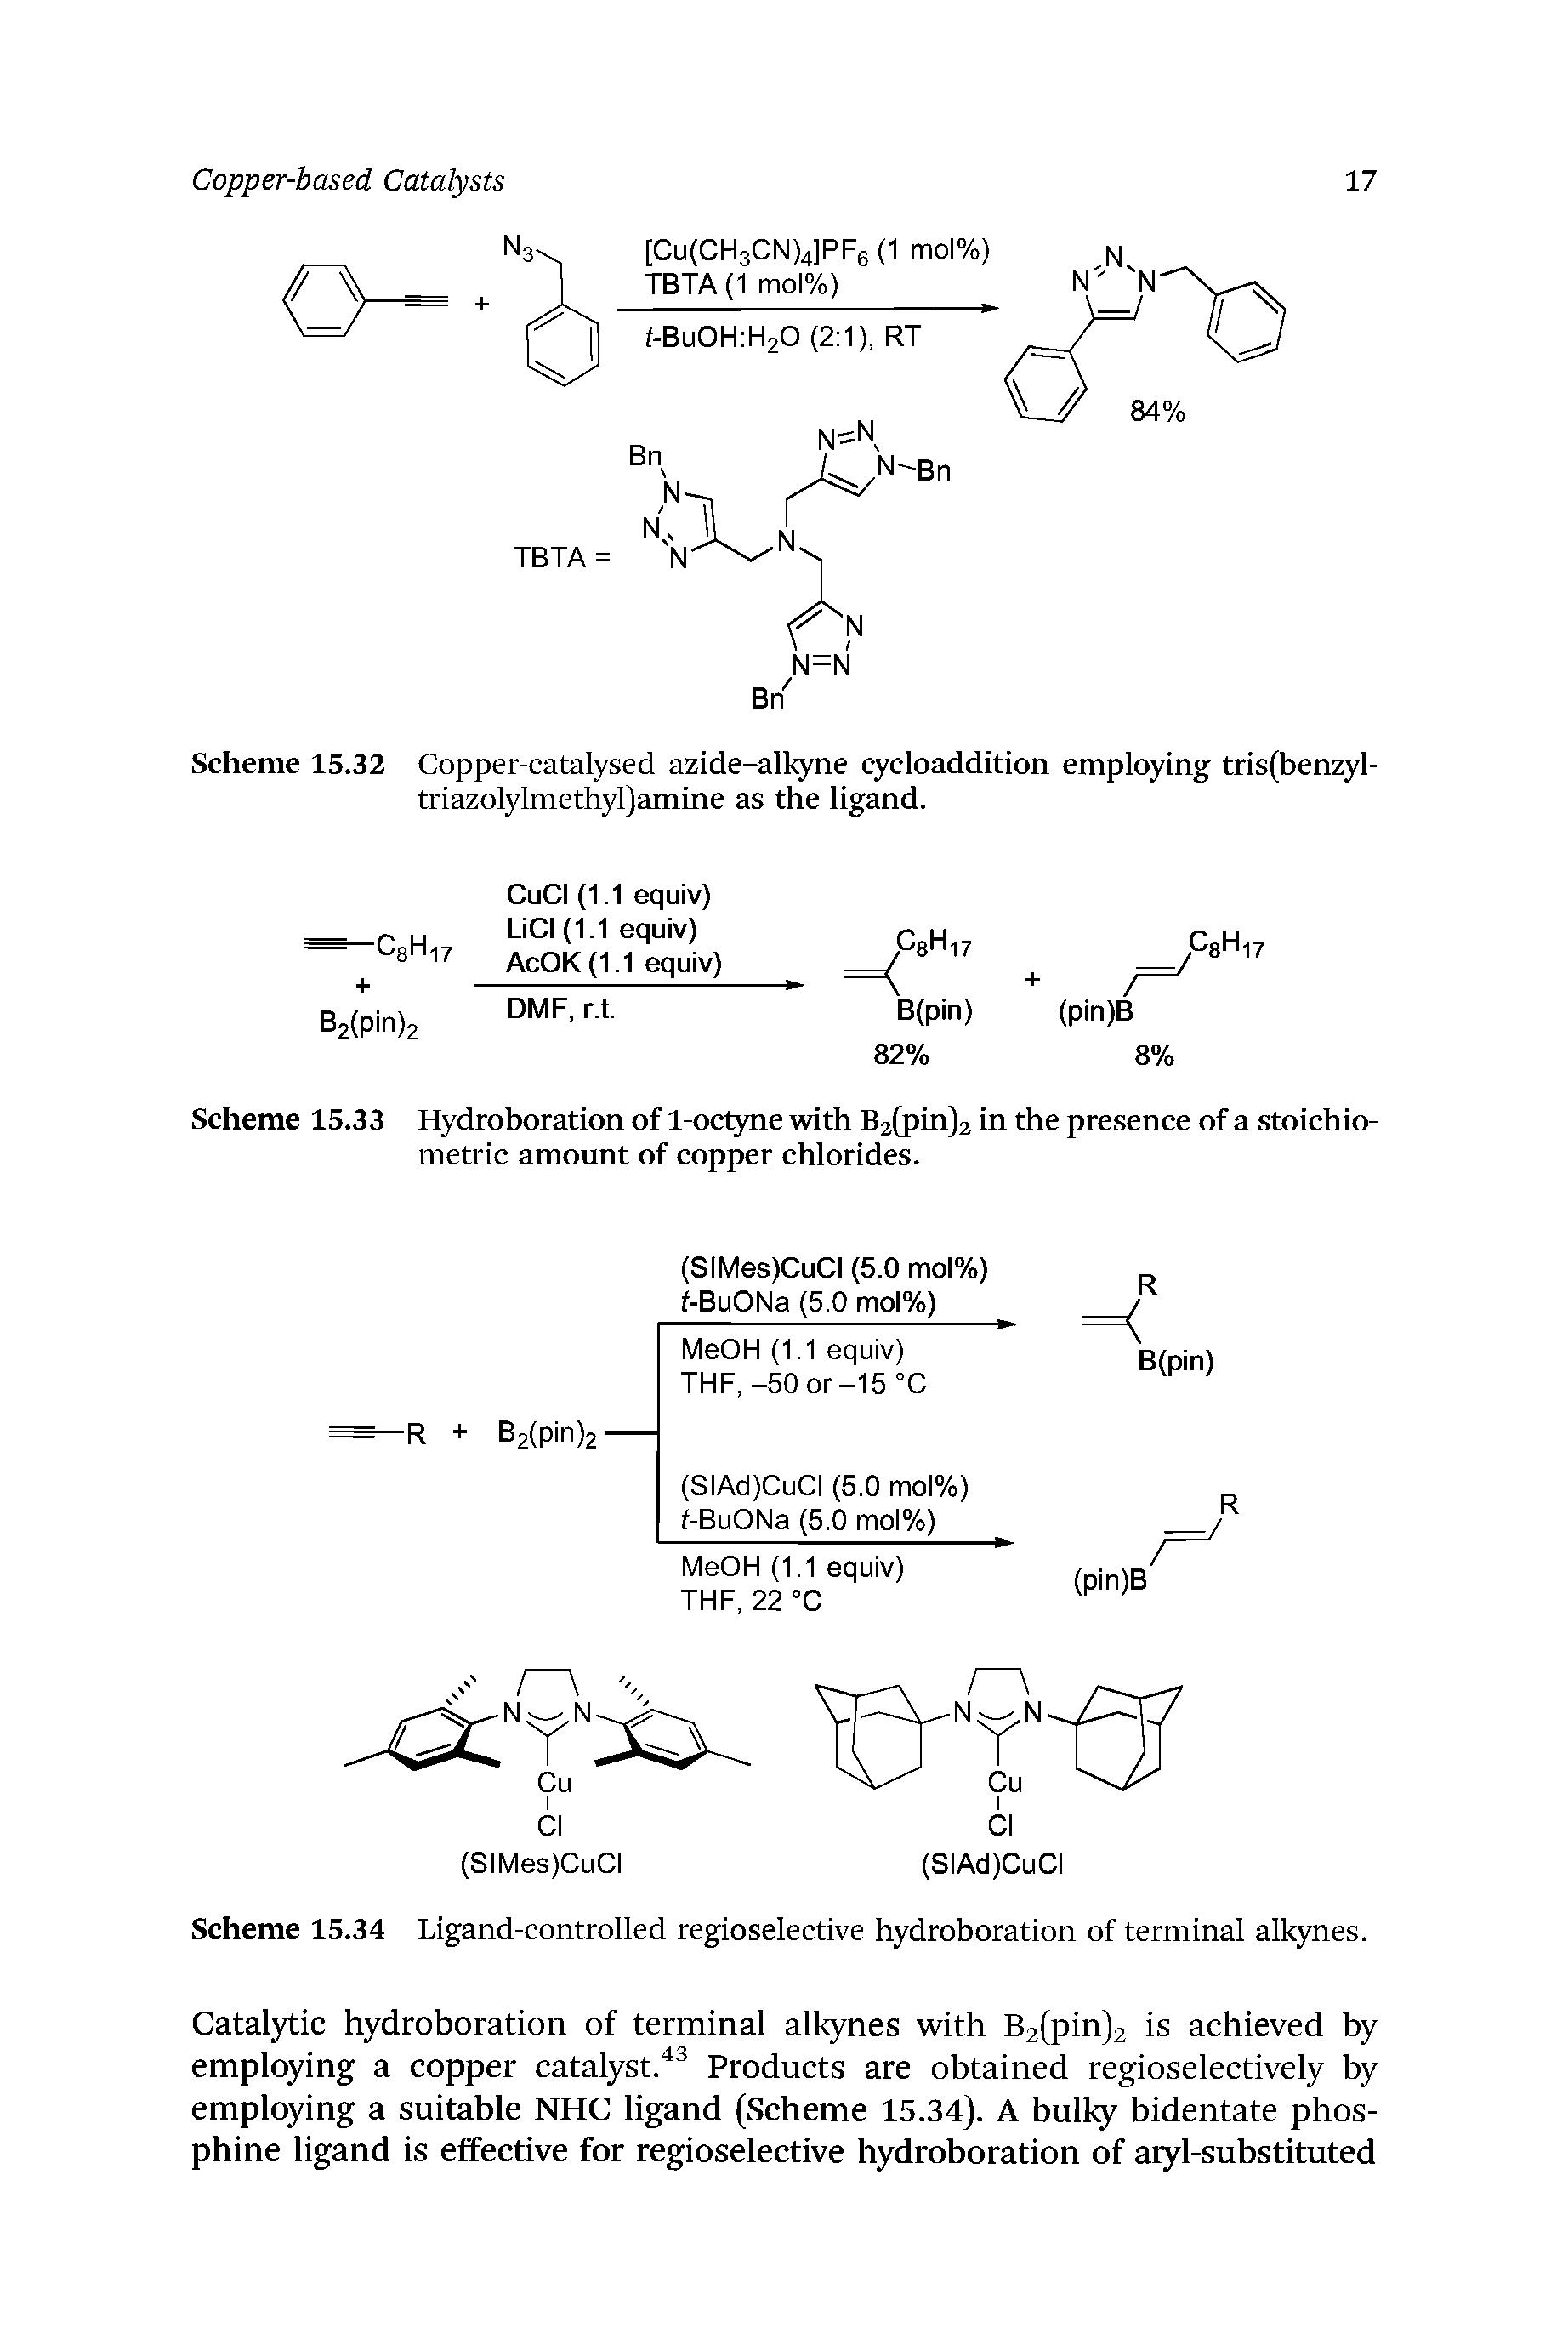 Scheme 15.34 Ligand-controlled regioselective hydroboration of terminal alkynes.